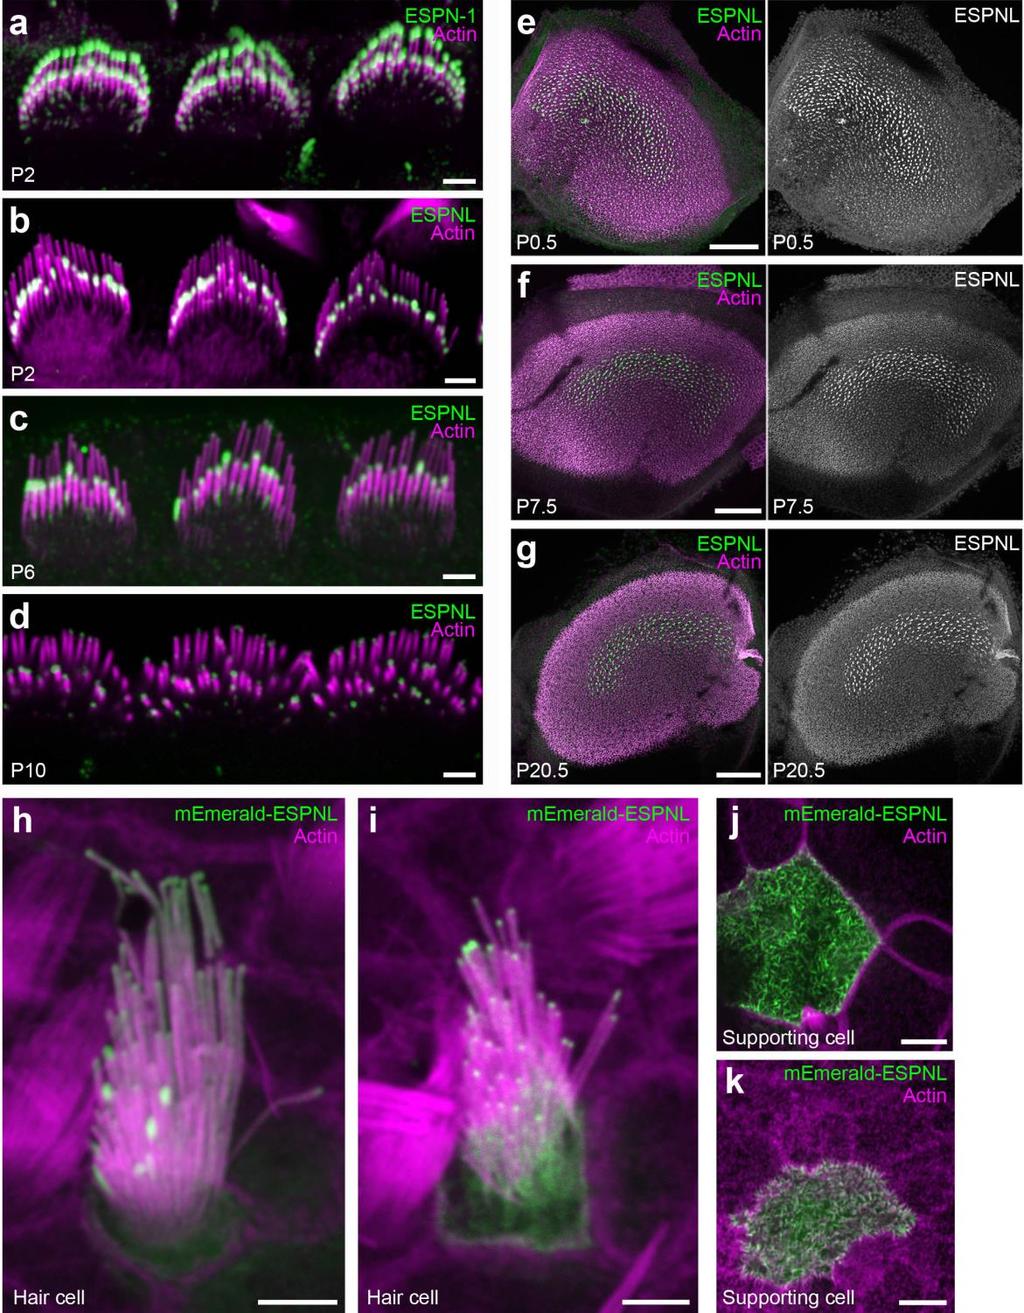 Supplementary Figure 8. Development of ESPNL immunoreactivity in cochlear and vestibular hair cells. (a) ESPN-1 labeling (green) in P2 cochlear inner hair cells.